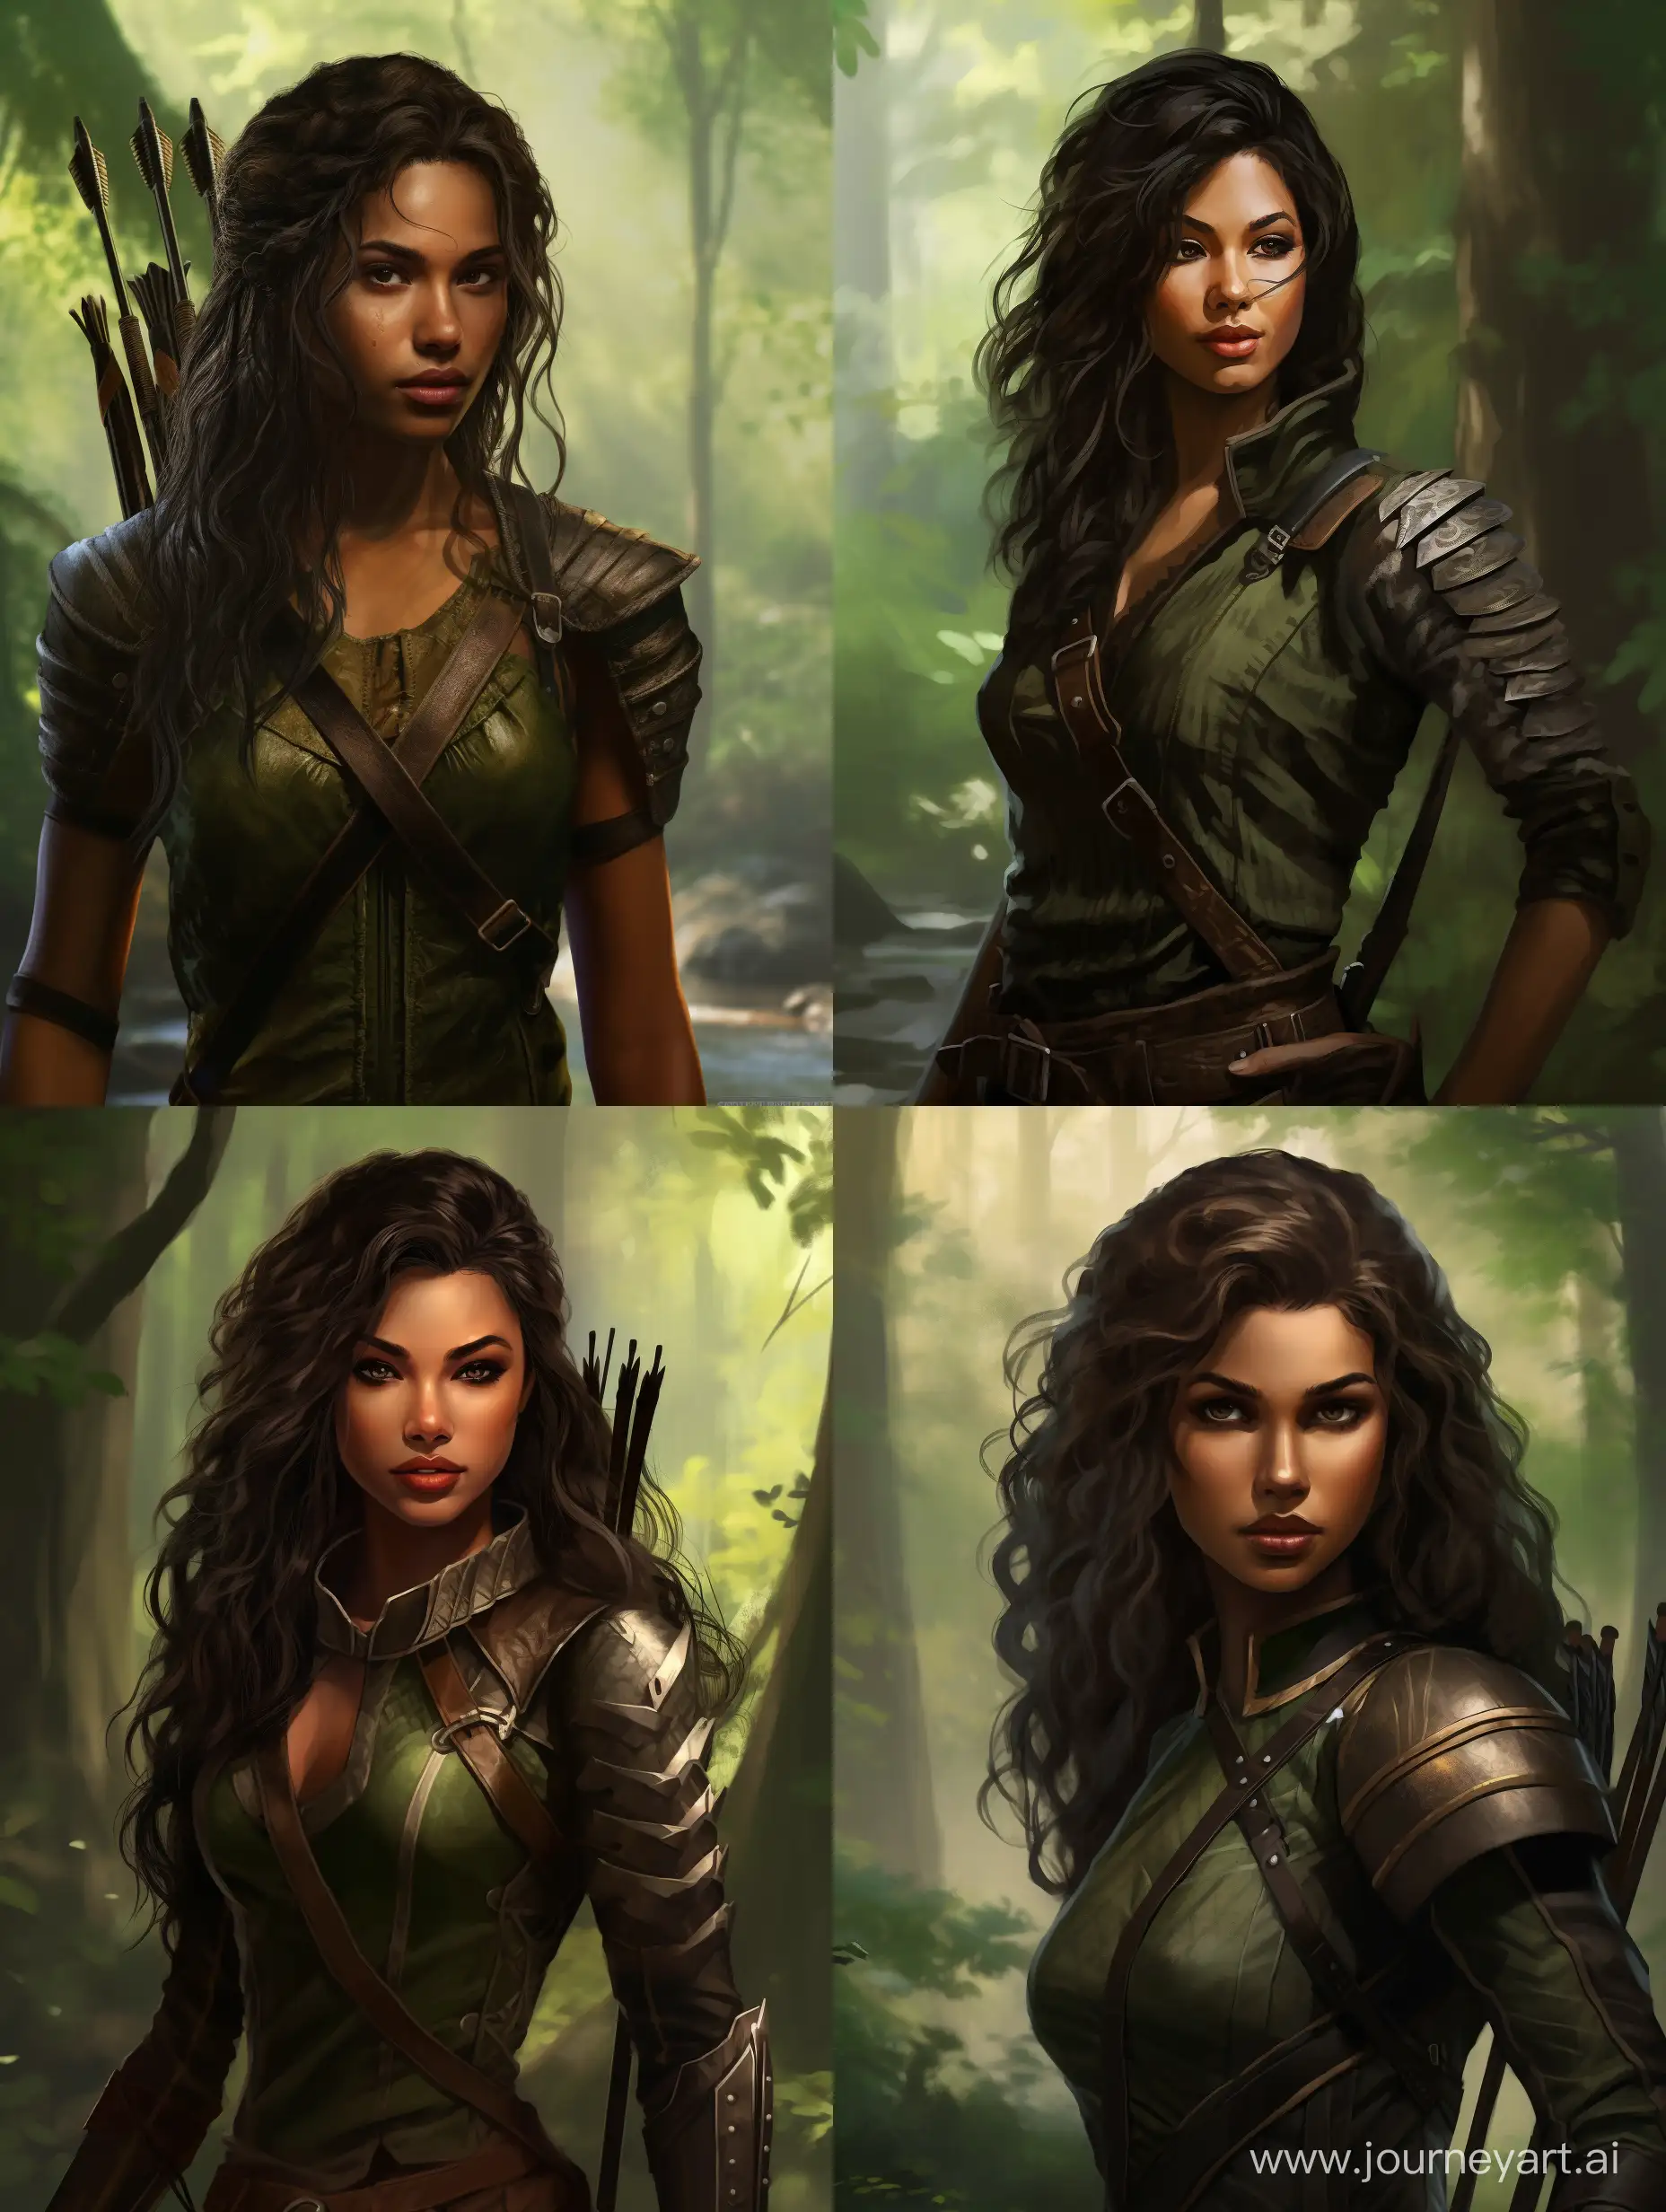 half-elf woman, olive skin, black hair, green and brown ranger fantasy clothing, holding a bow, forest background, portrait